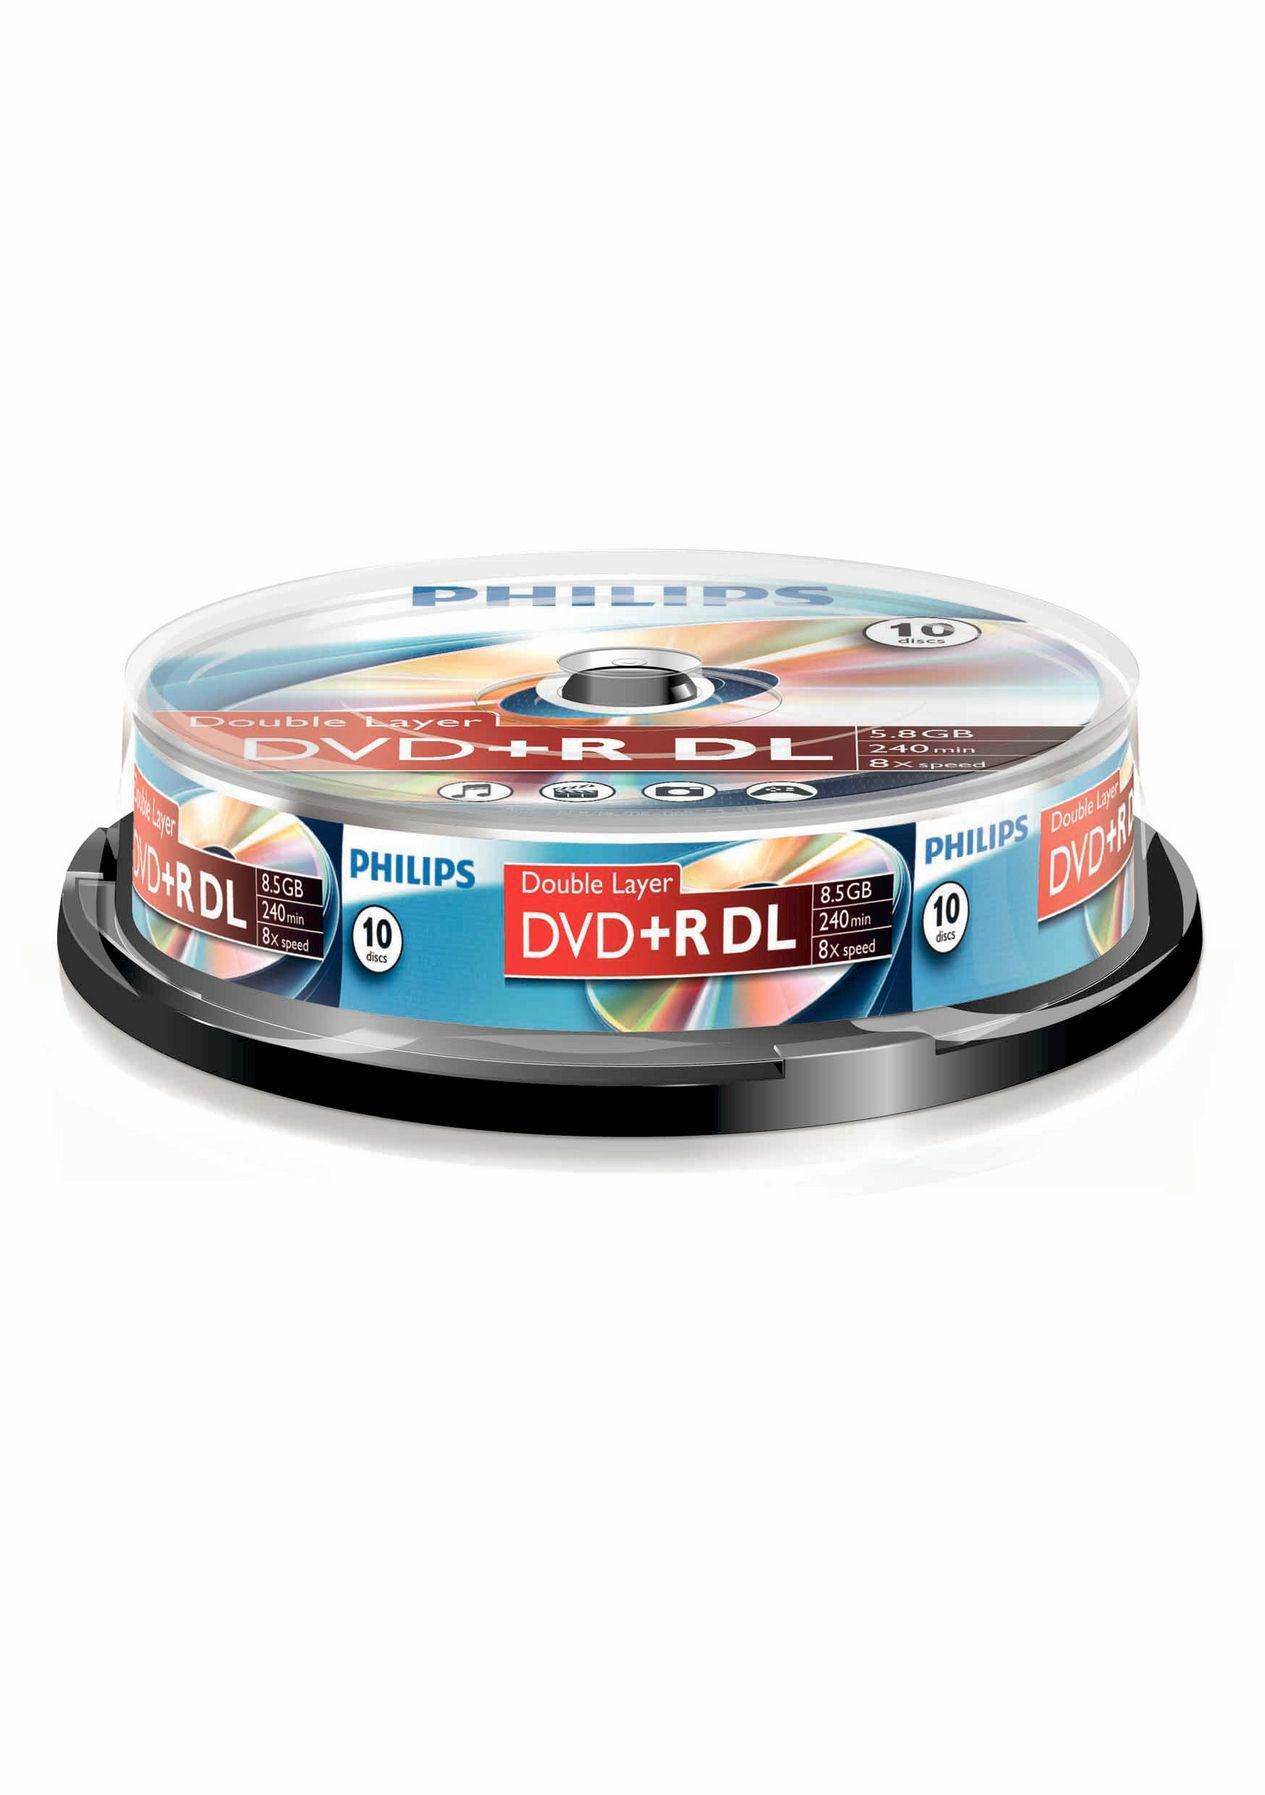 PHILIPS DVD+R Double Layer 8x, 10er Spindel (DR8S8B10F/00)